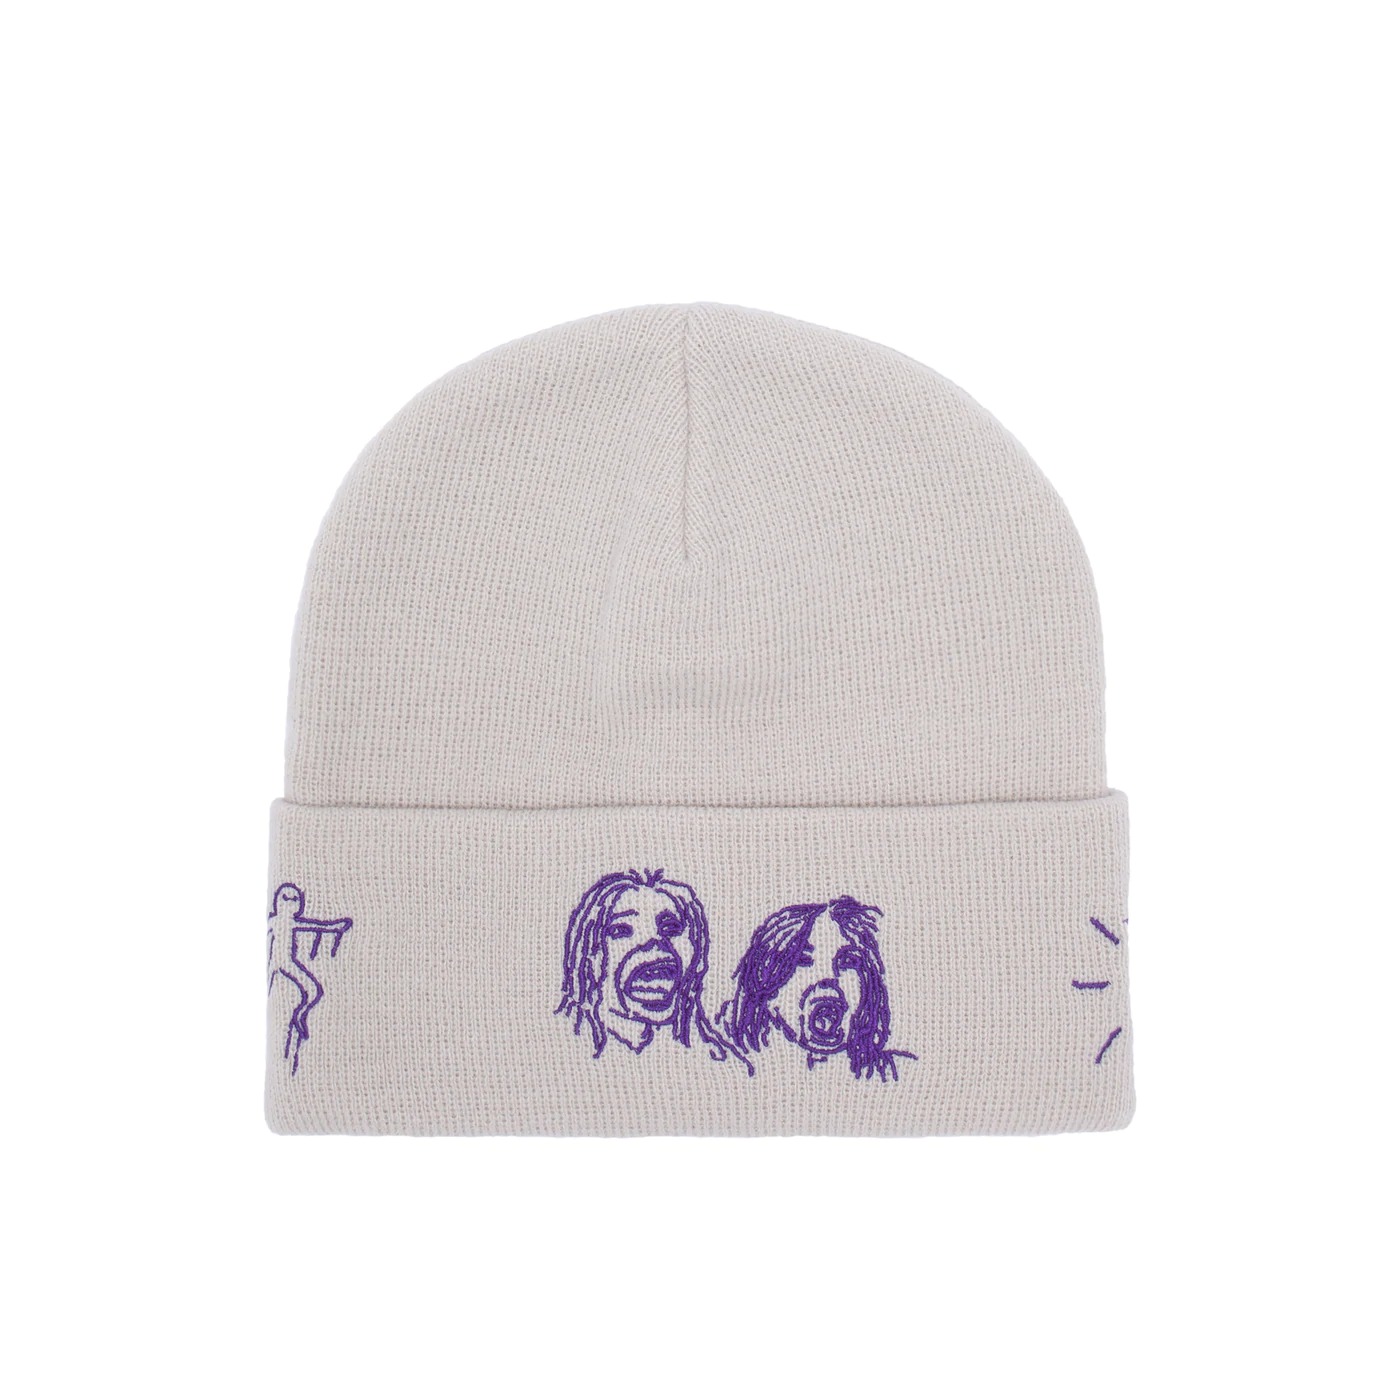 FUCKING AWESOME SKETCHY CUFF BEANIE ビーニー ニットキャップ ...